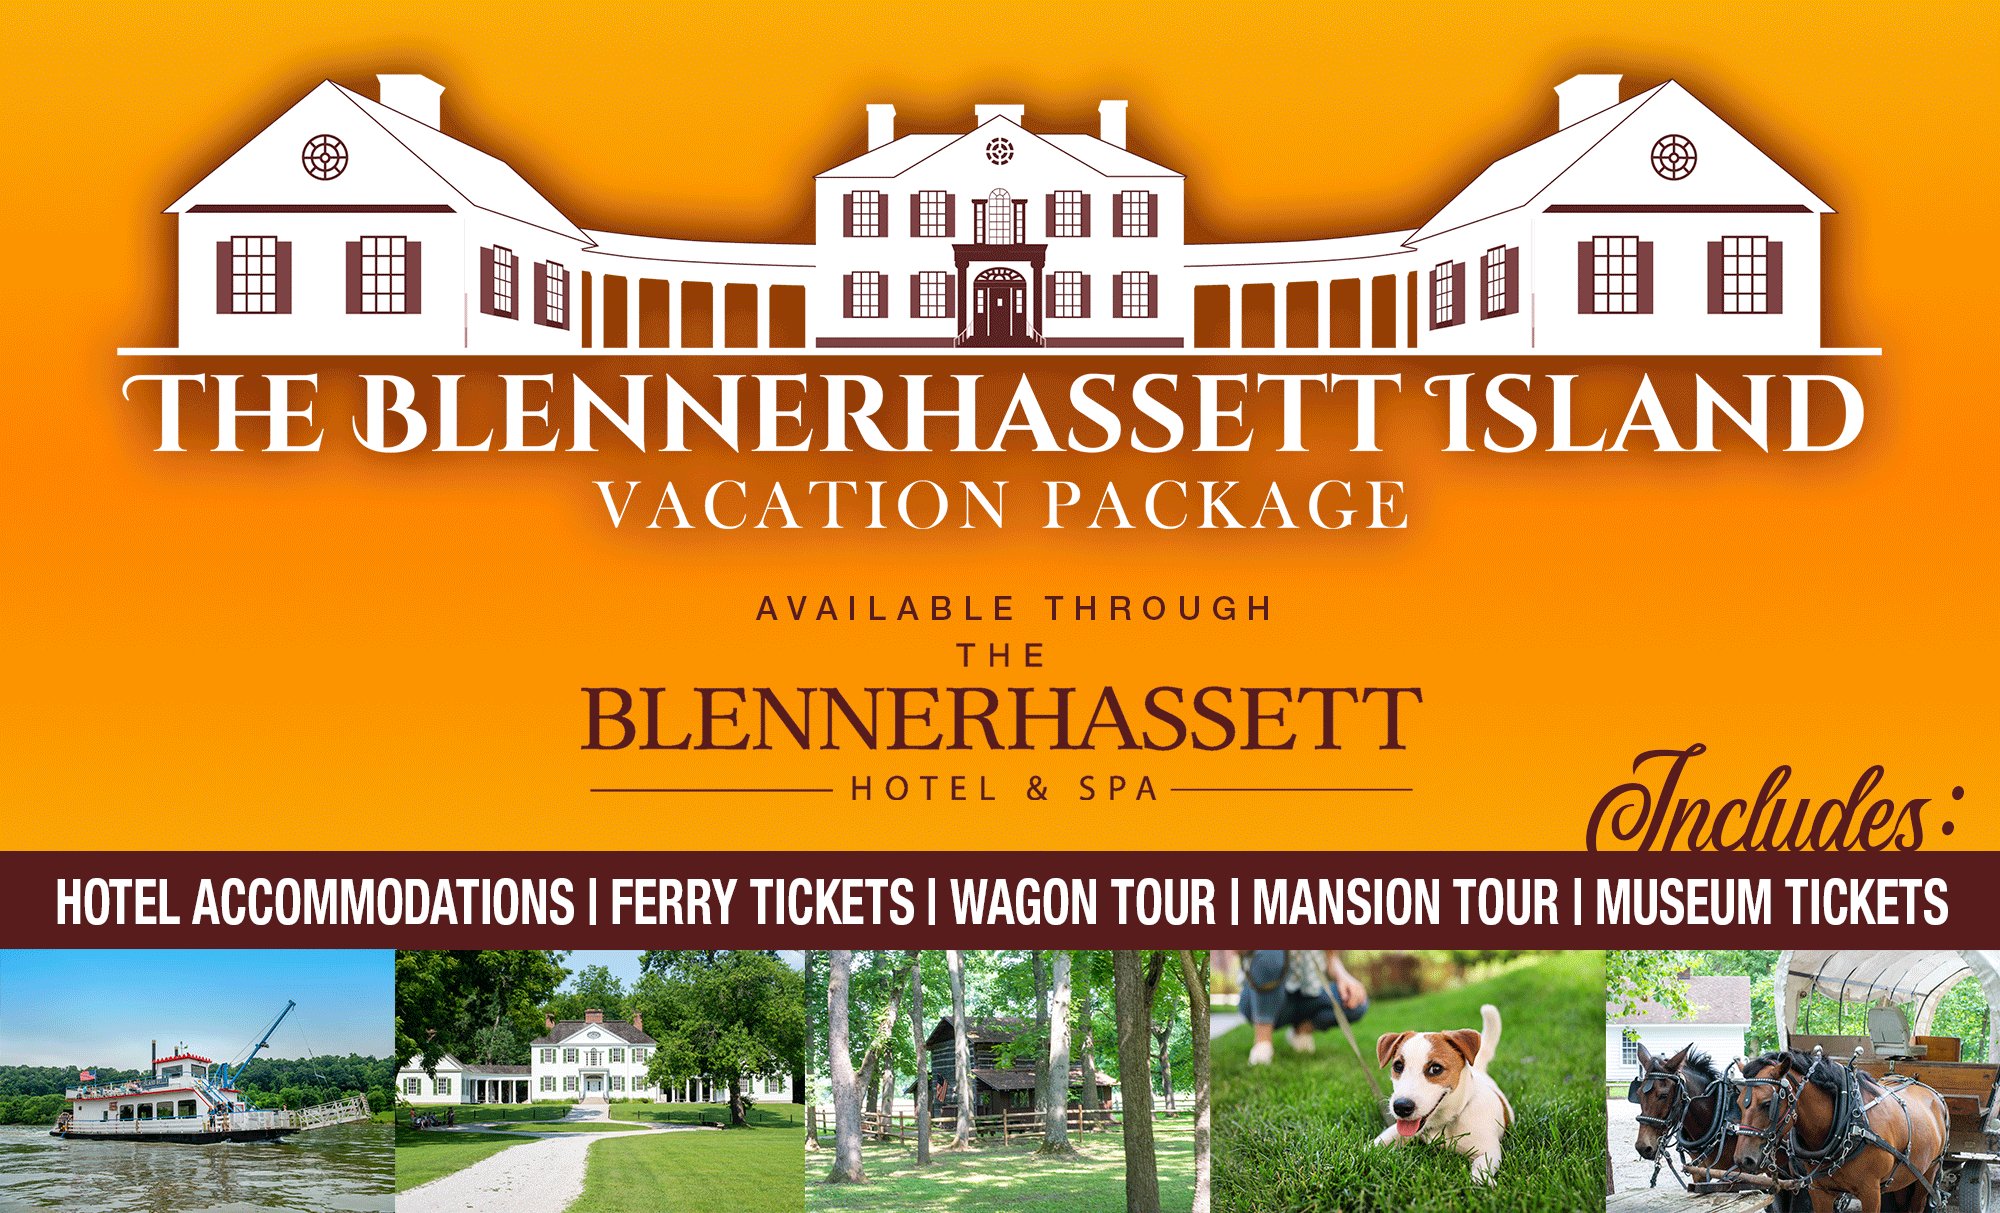 Blennerhassett Island Vacation Package Available through The Blennerhassett Hotel and Spa. Includes hotel accomodations, ferry tickets, wagon tour, mansion tour, museum tickets